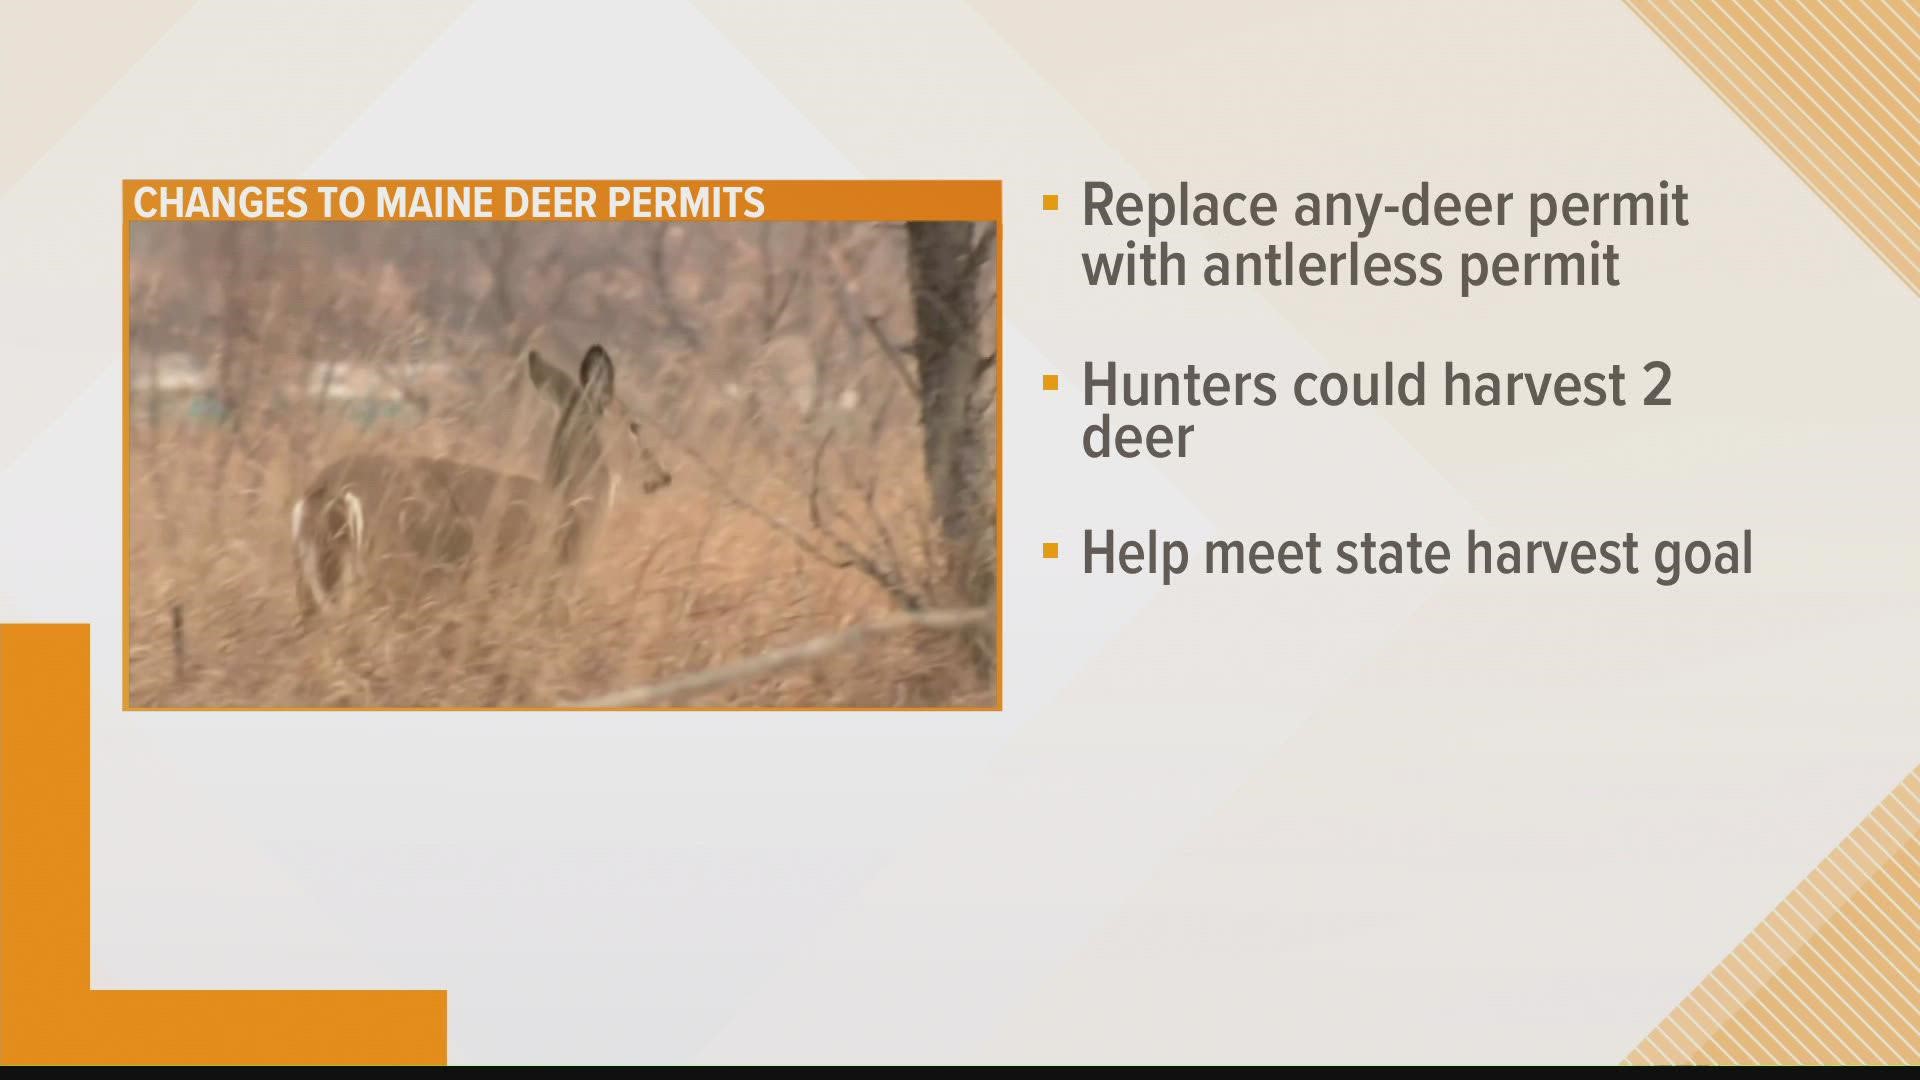 Wildlife officials propose replacing the traditional any-deer permit with an antlerless permit.